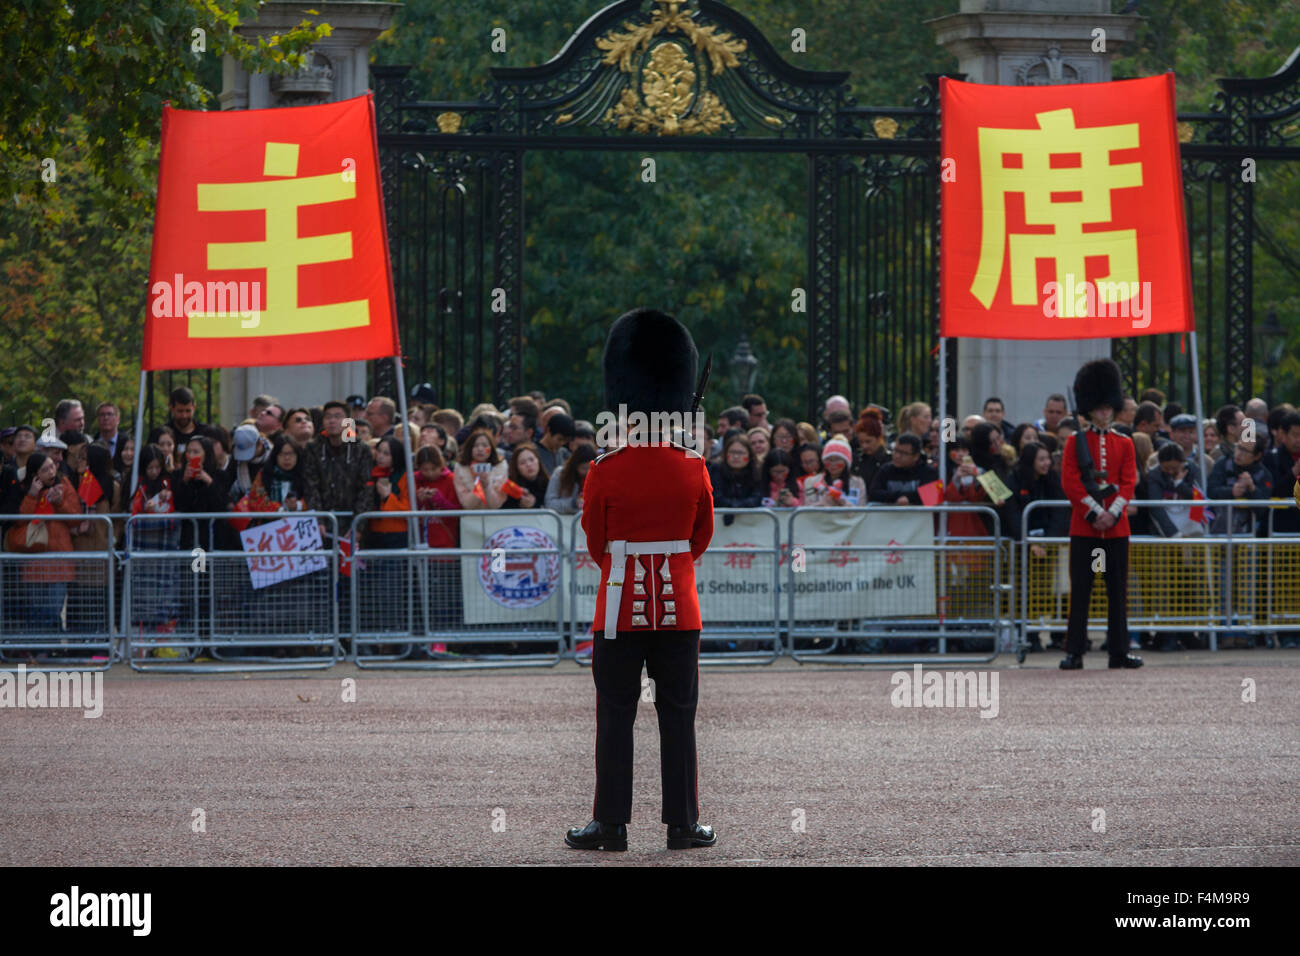 London, 20th October 2015. As crowds of supporters and protesters line the Mall in central London, Chinese leader Xi Jinping starts off his state visit to Britain. There is much attached to Anglo-Sino relations and this series of trade and diplomatic events is of great importance to the UK government in terms of new business and investment. Protesters however, voiced their distaste at human rights issues for dissenters and of the occupation of Tibet. Copyright Richard Baker / Alamy Live News. Stock Photo